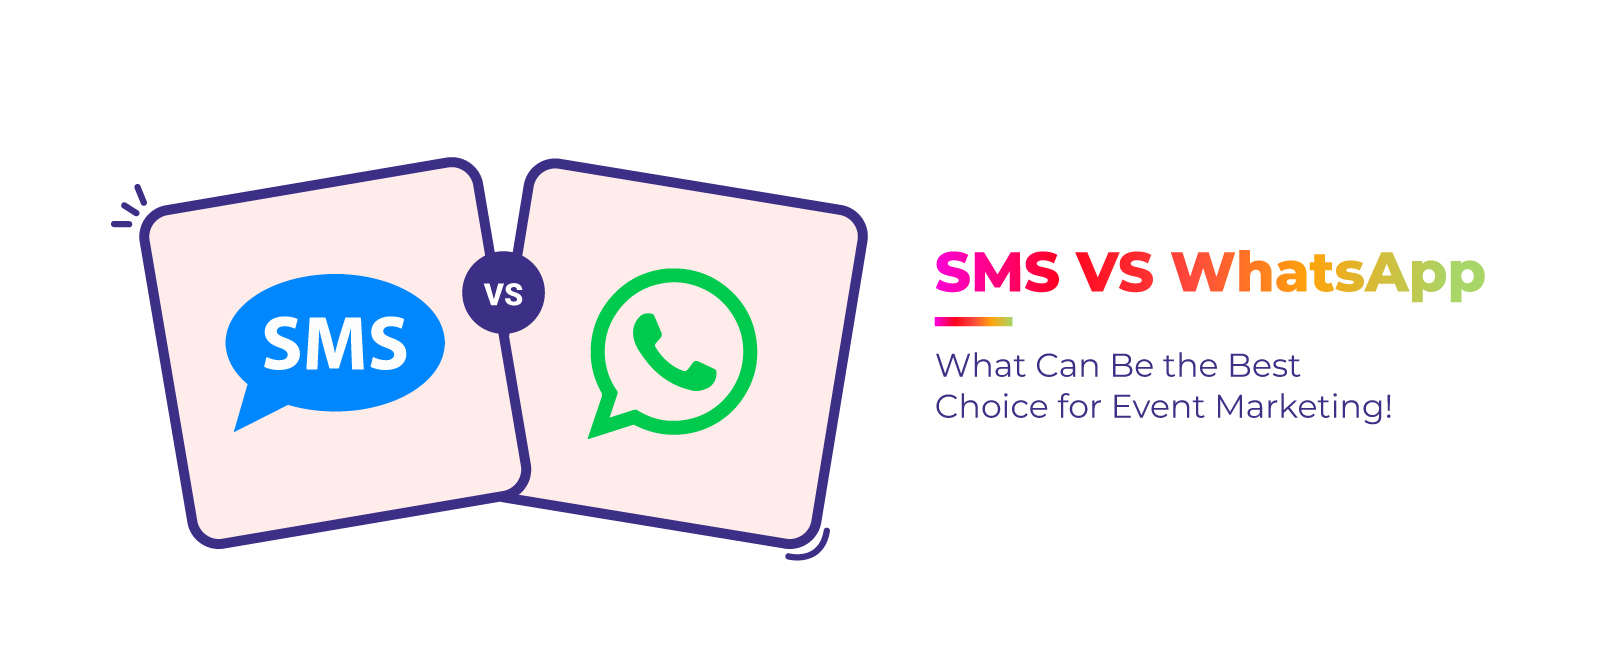 SMS VS WhatsApp: What Can Be the Best Choice for Event Marketing